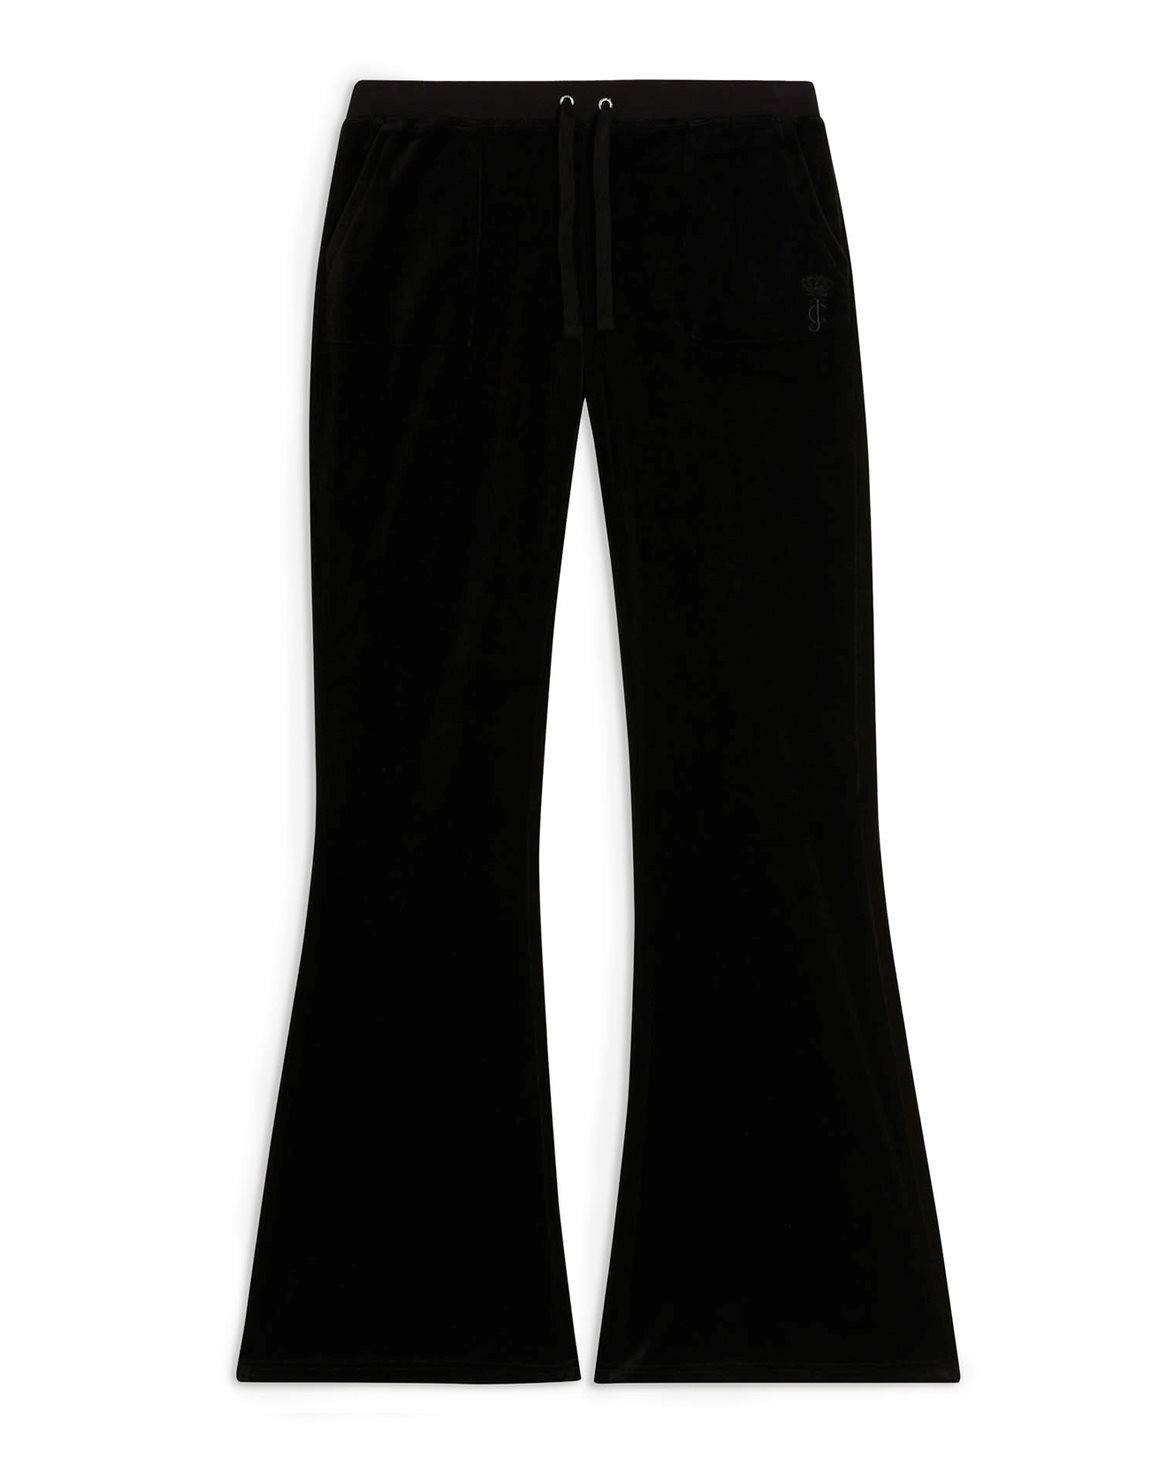 Juicy Couture Heritage Caisa Ultra Low Rise Pant Black